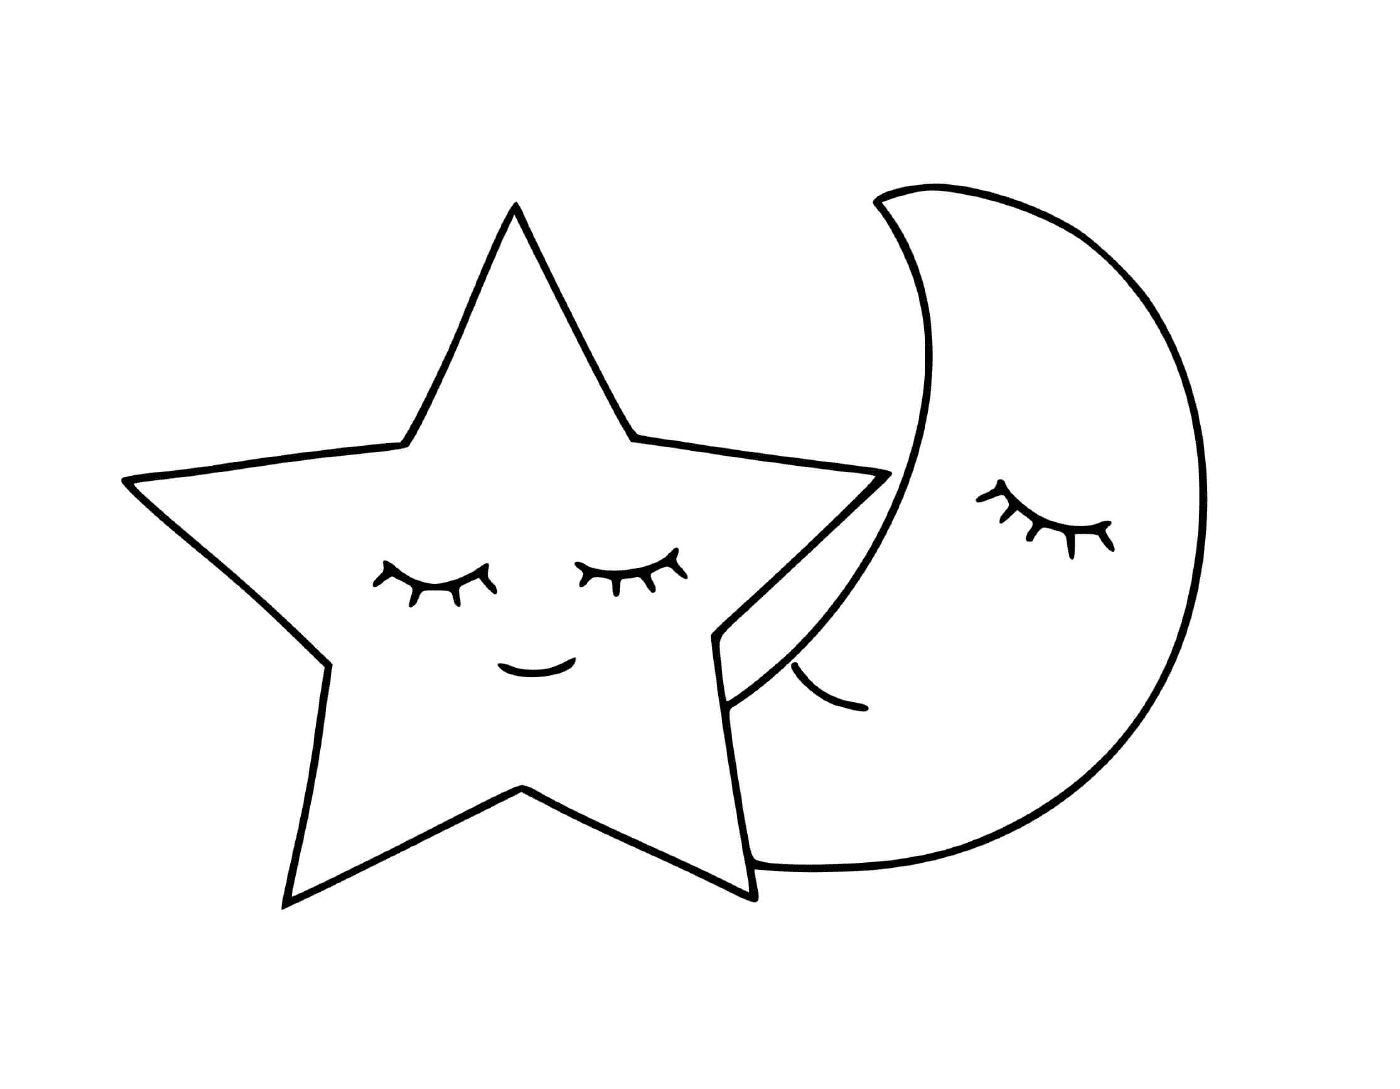  Moon and star dodge 